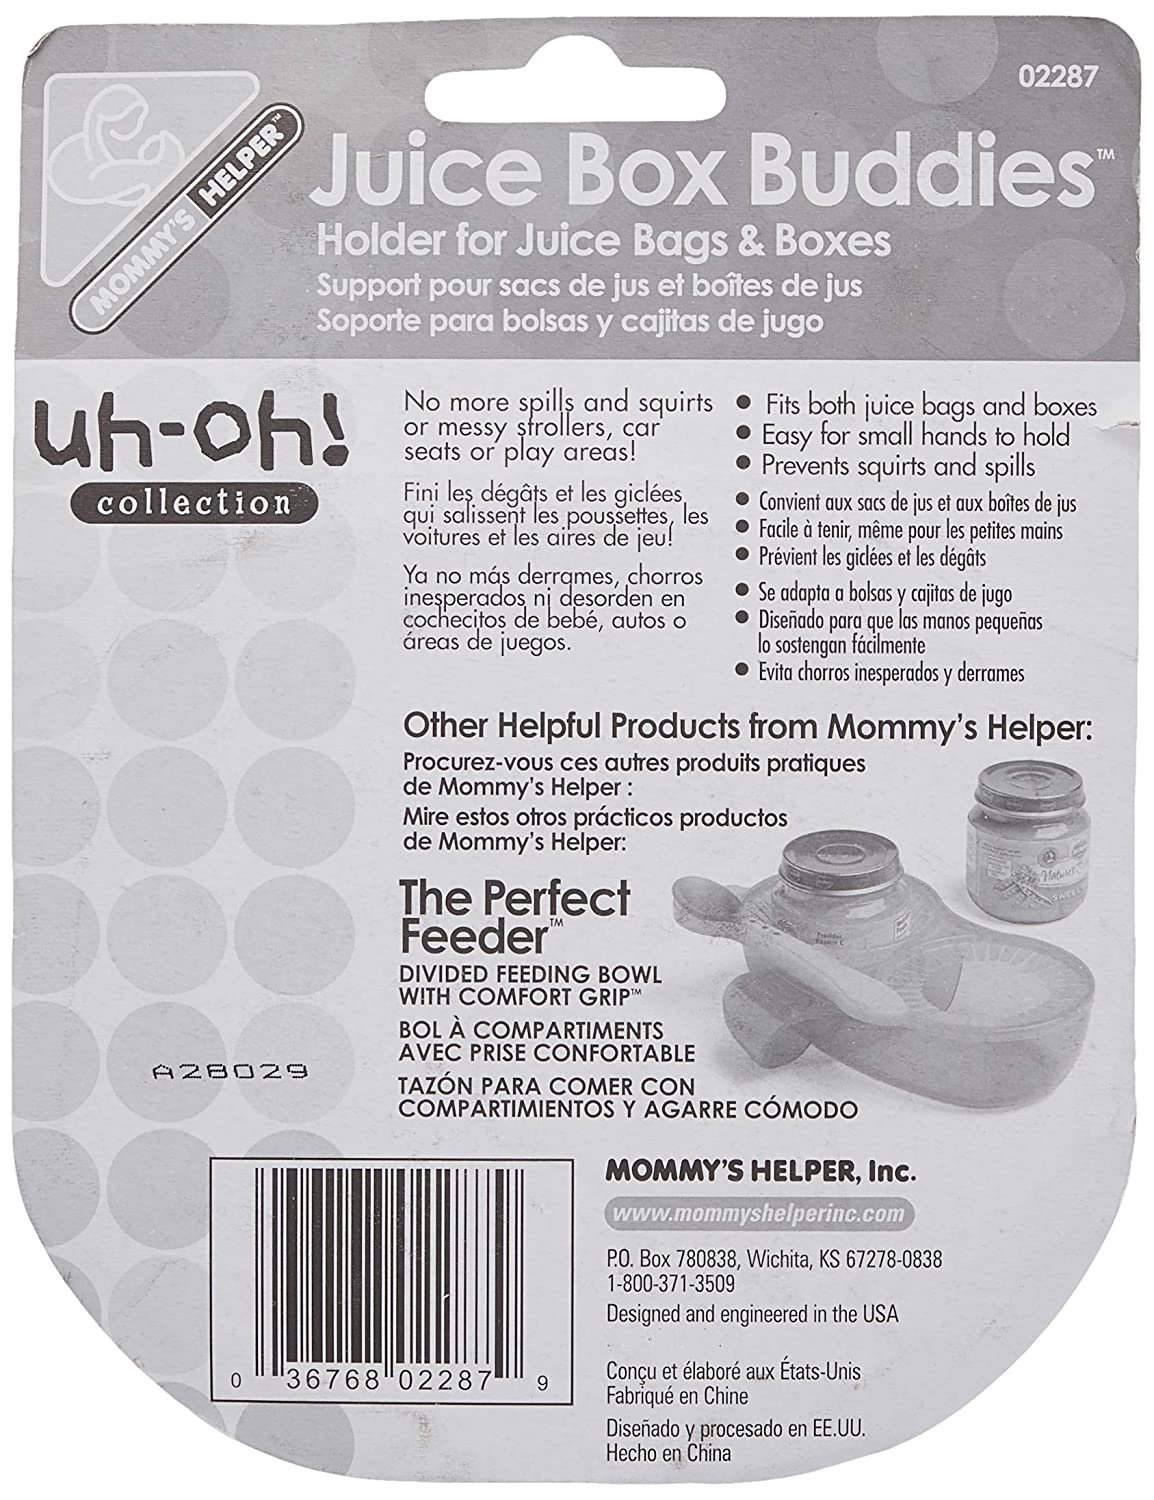 Mommys Helper Juice Box Buddies Holder for Juice Bags and Boxes, Colors May Vary